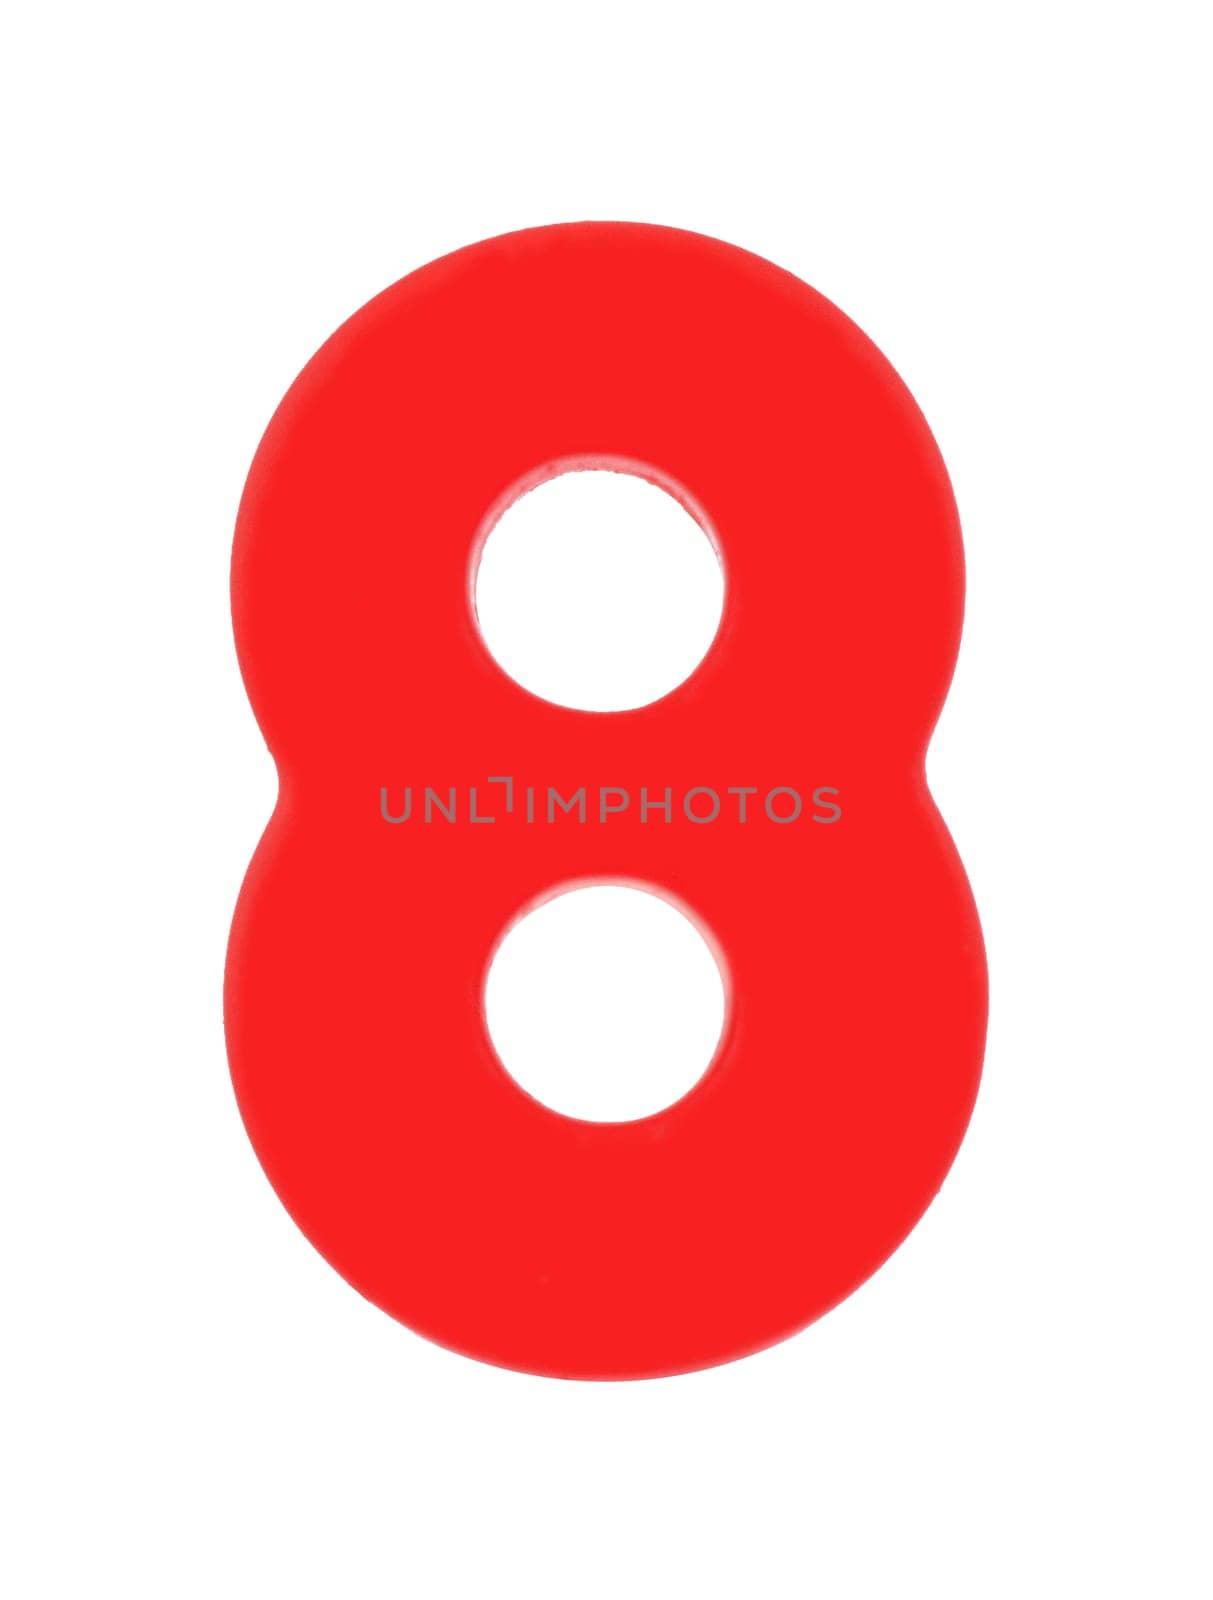 An 8 eight magnetic letter on white with clipping path